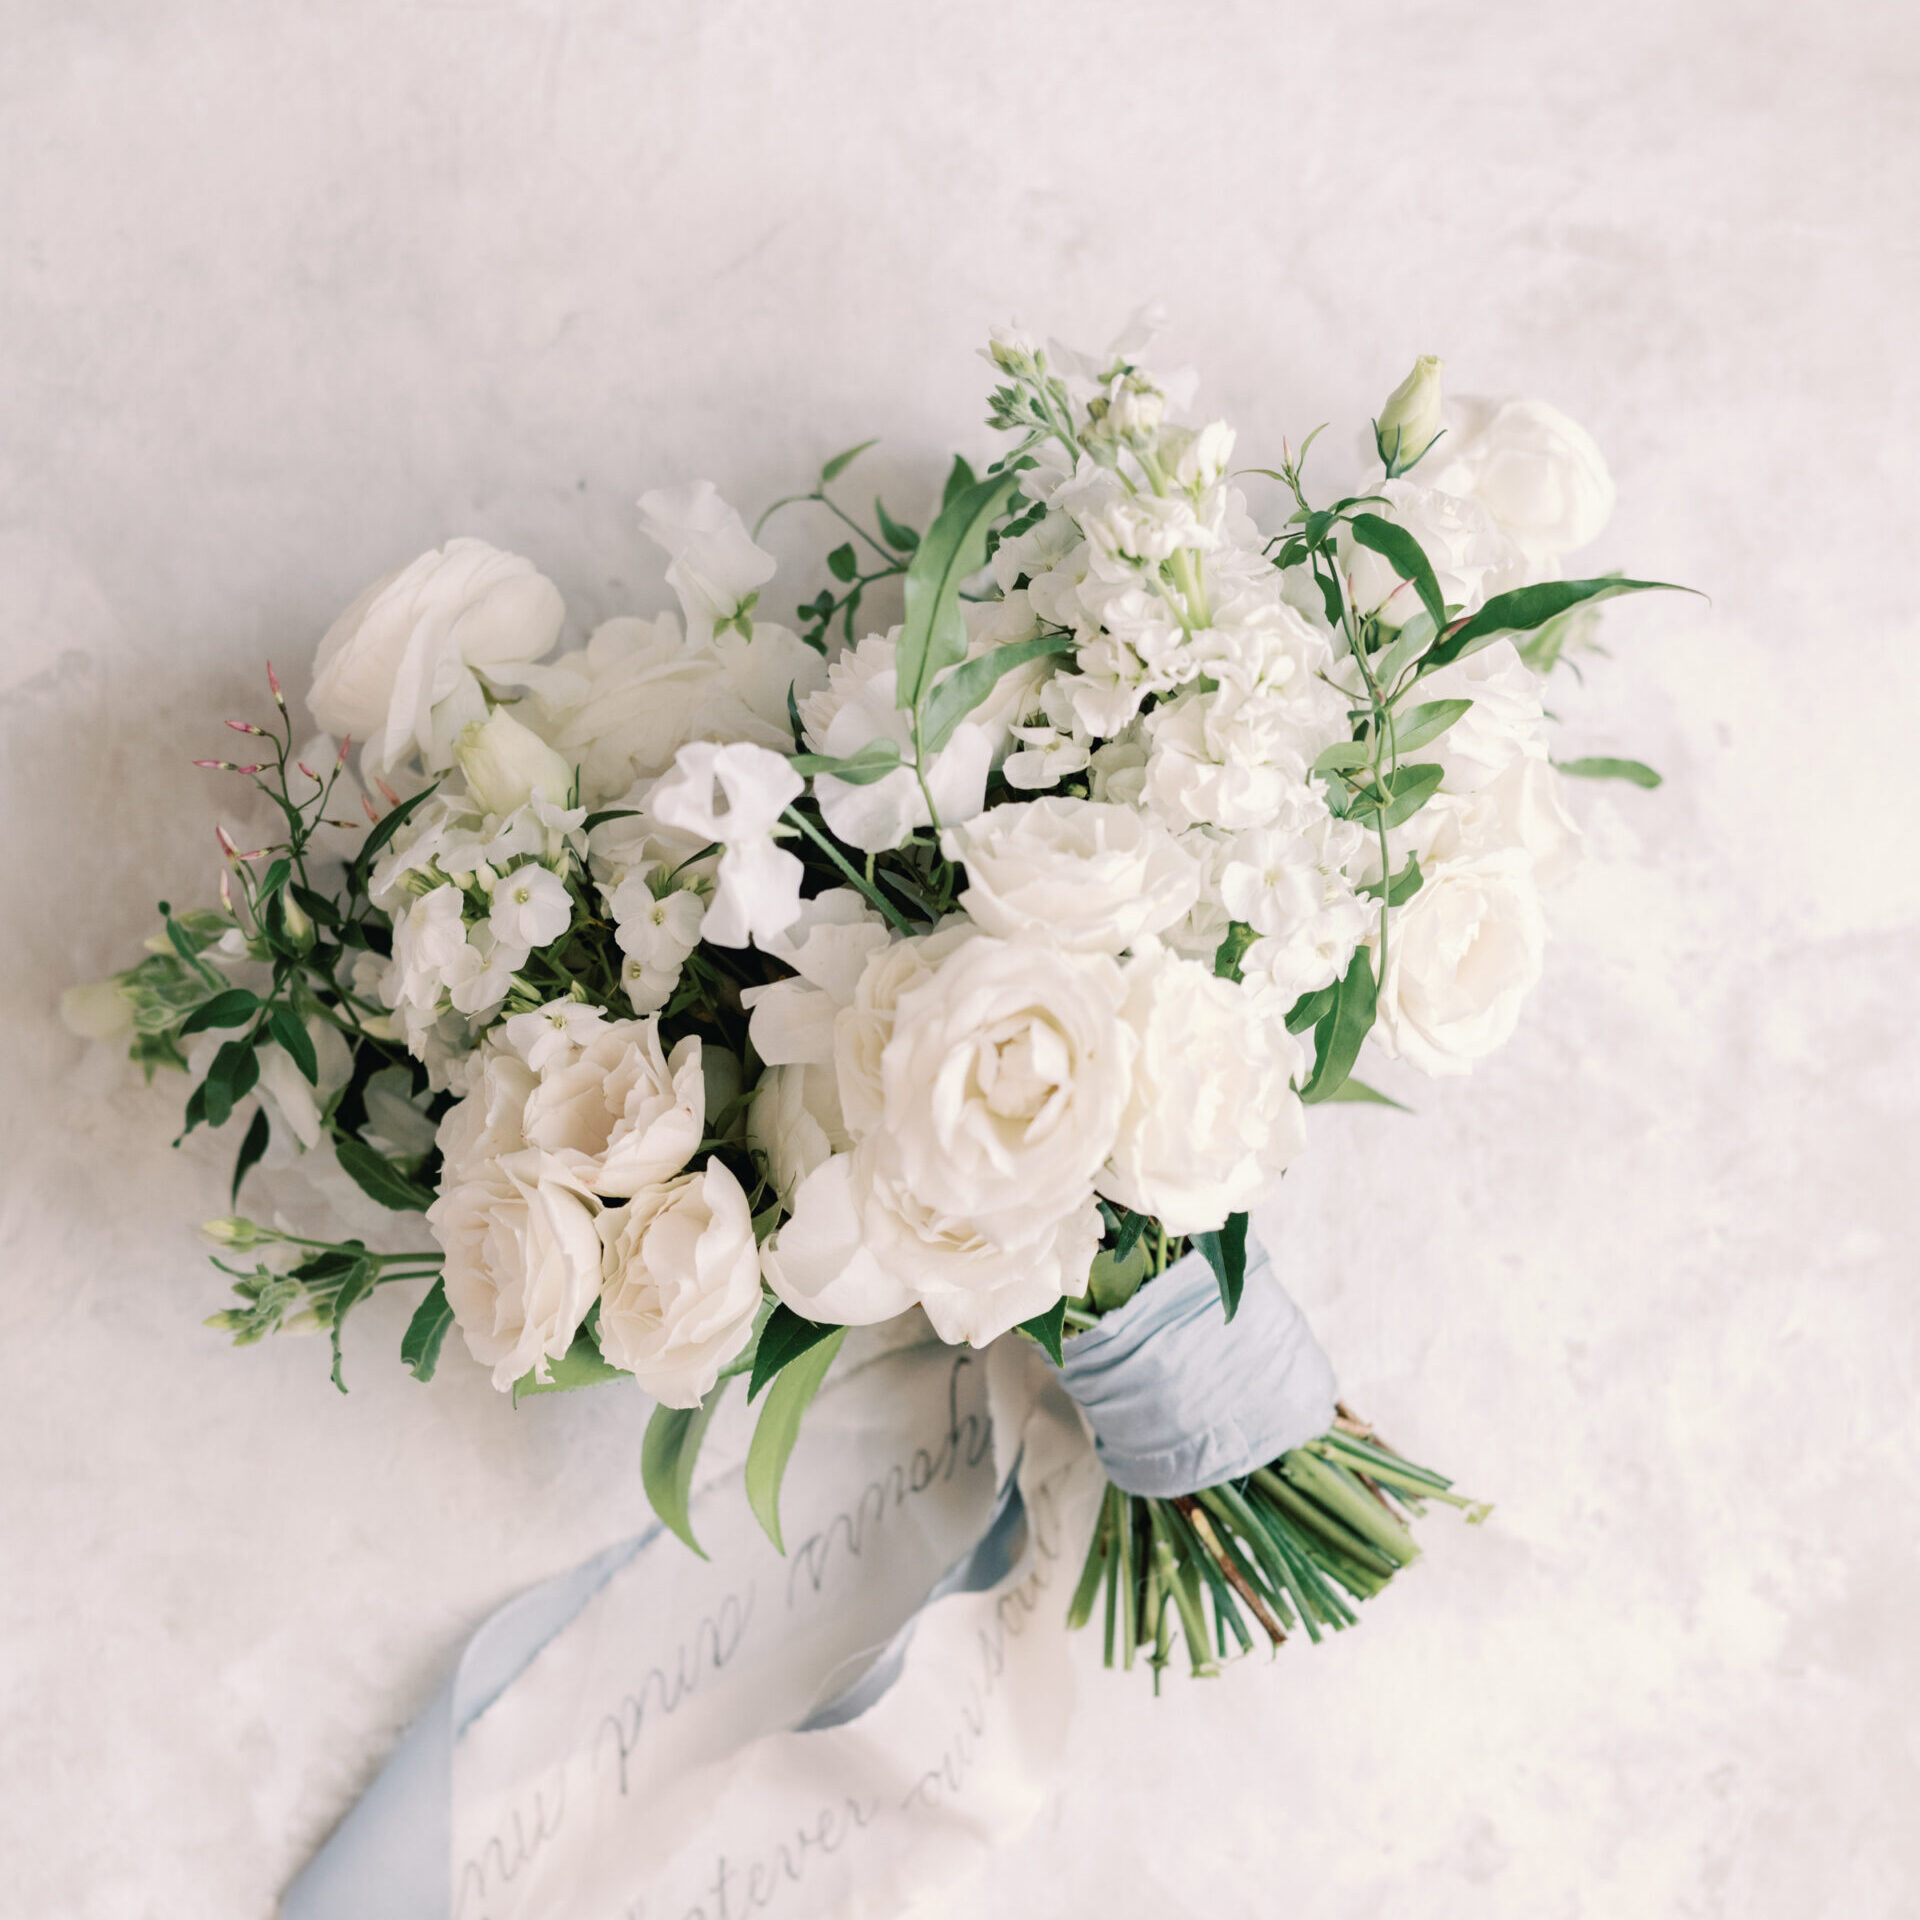 Bridal flower bouquet flatlay, a stock image for wedding planners and florists.